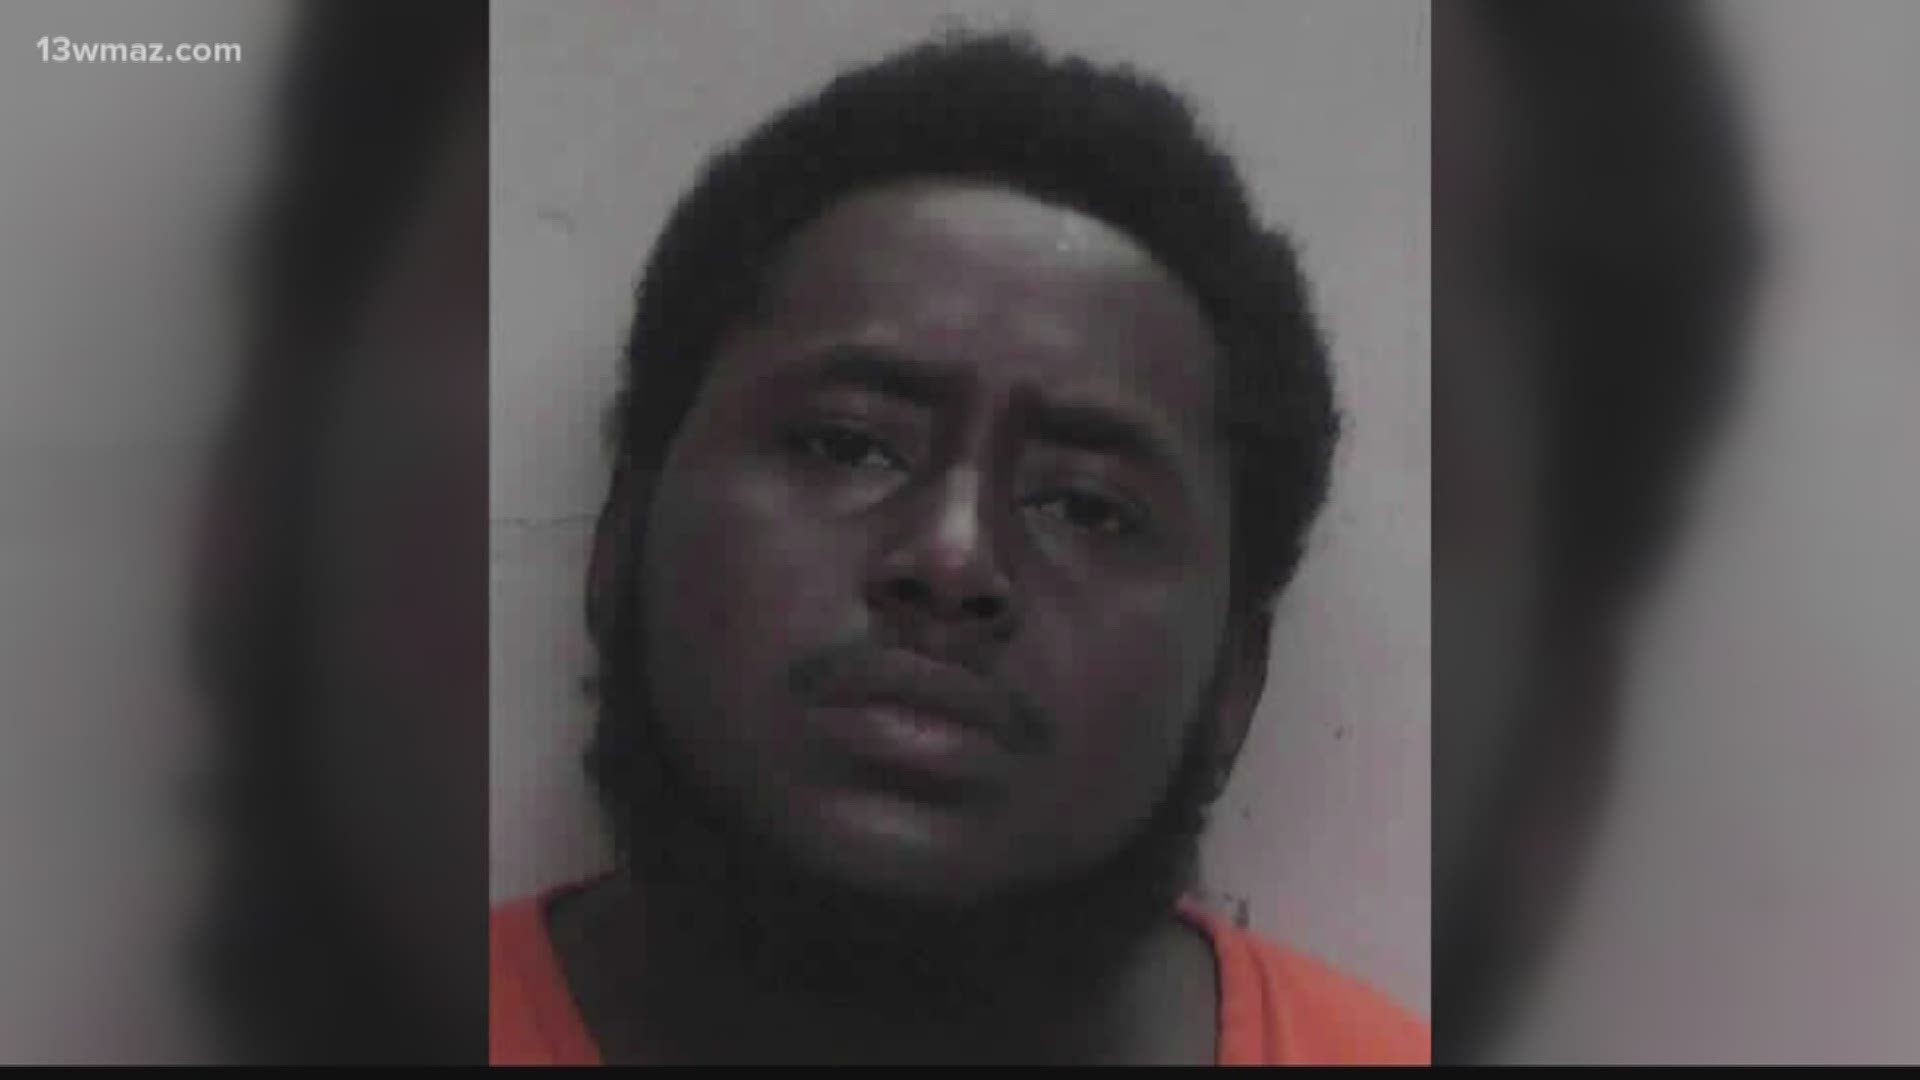 The Dublin Police Department arrested 26-year-old Davion Thompkins after they say he shot and killed his uncle Sunday